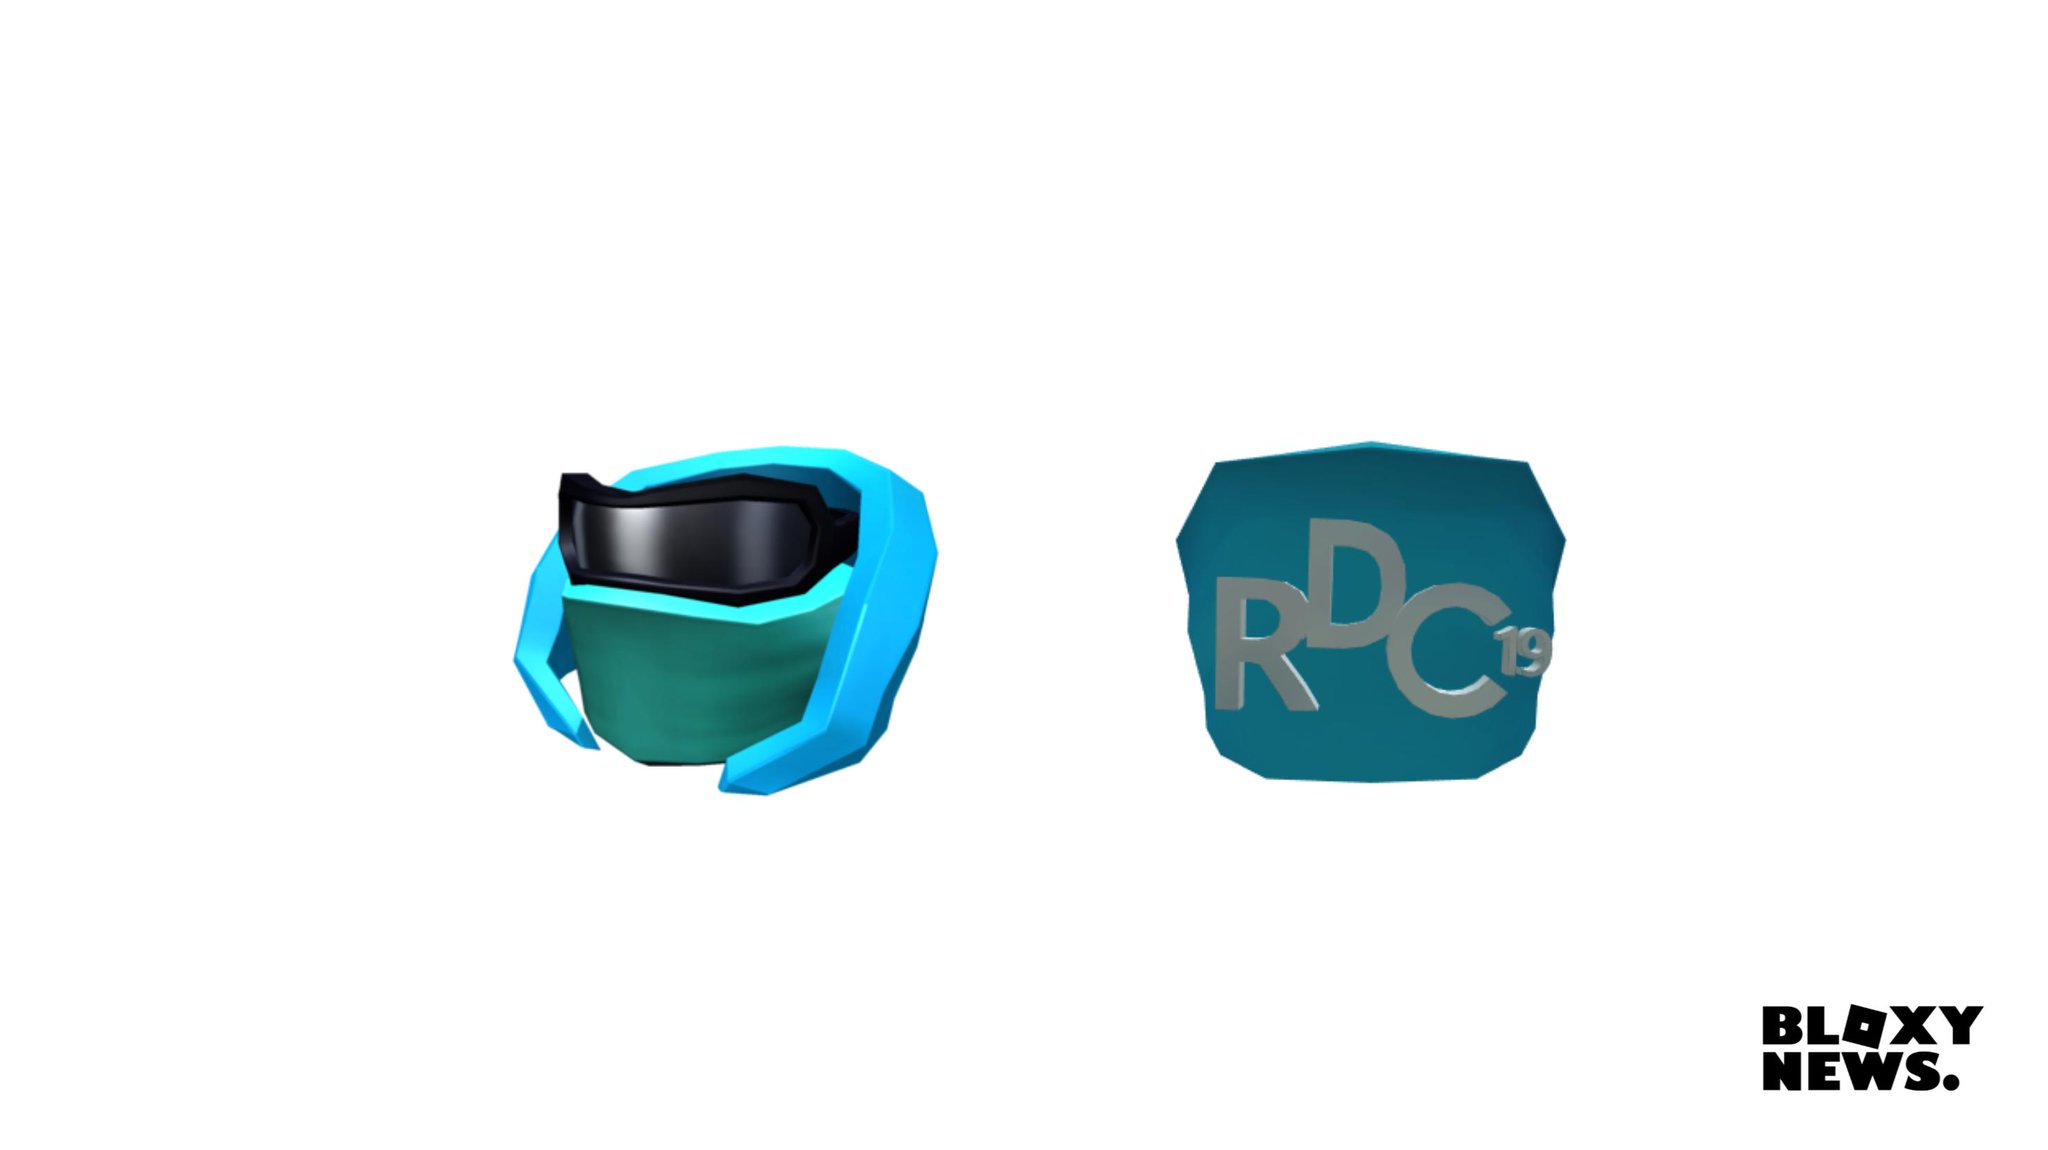 Bloxy News On Twitter Bloxynews Roblox Just Released An Ice Breaker Commando That Has The Rdc2019 Logo On The Back Currently Unsure If This Will Be Available To Everyone Or Just - roblox rdc logo